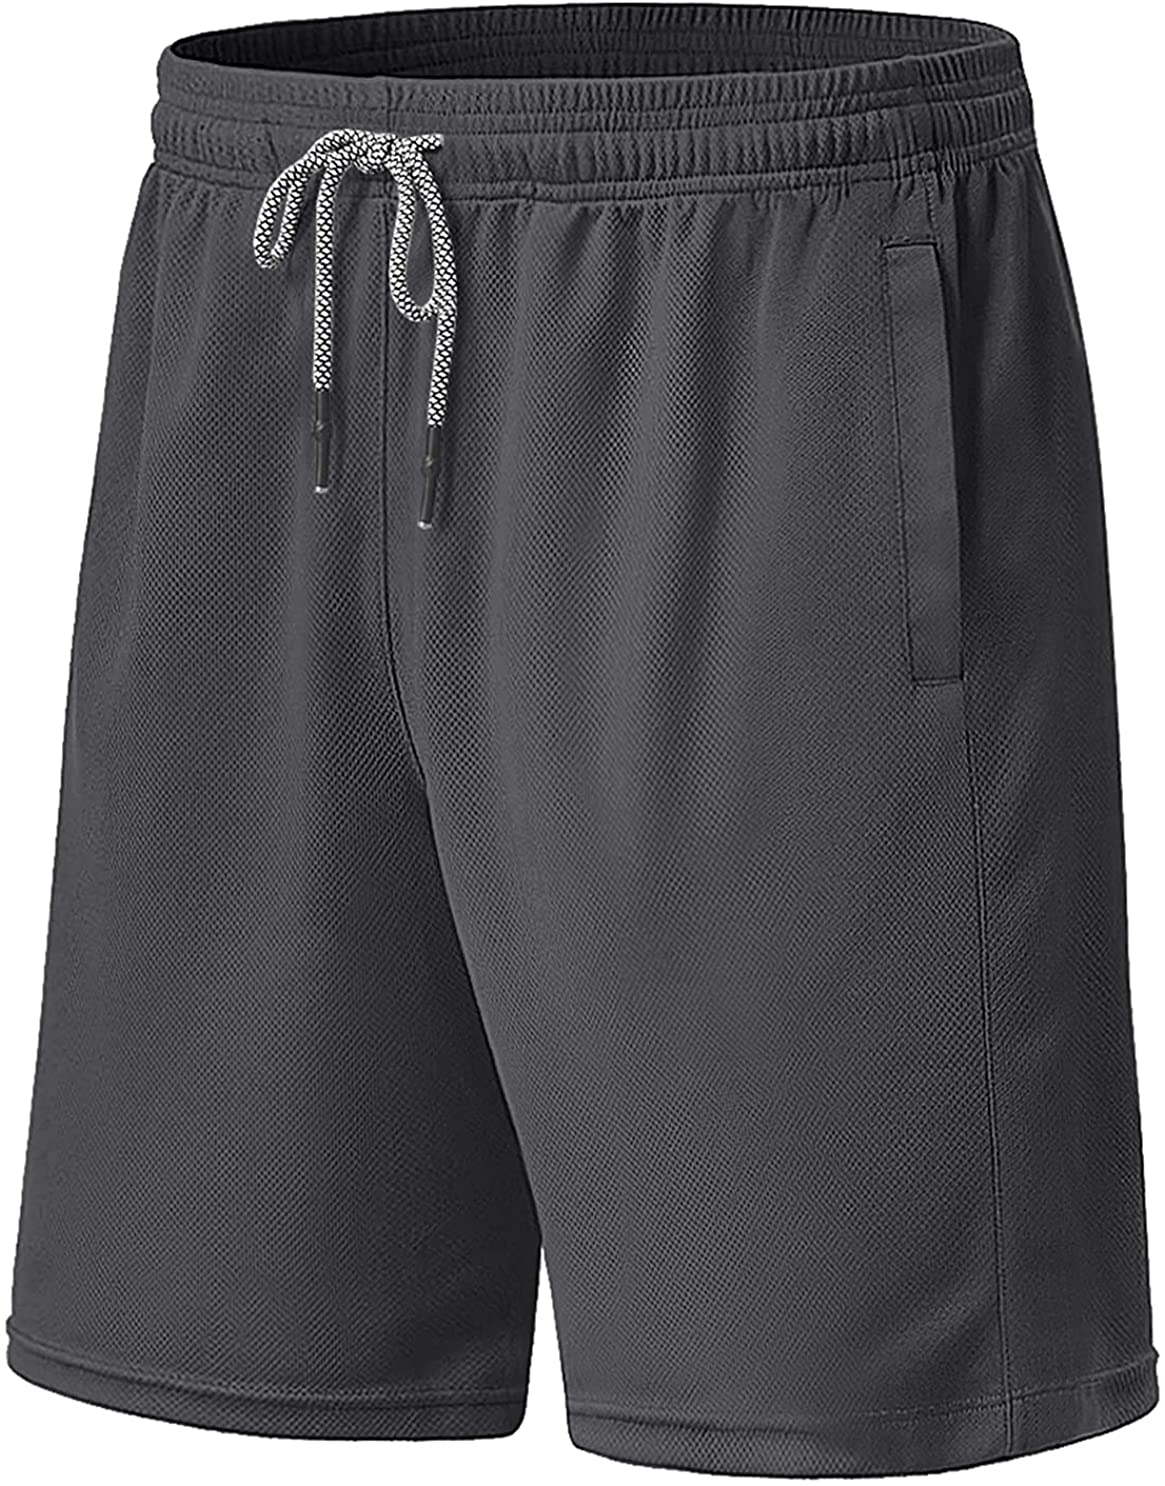 MAGCOMSEN Men's Mesh Running Shorts with 2 Pockets Drawstring Quick Dry Workout Gym Yoga Athletic Shorts 